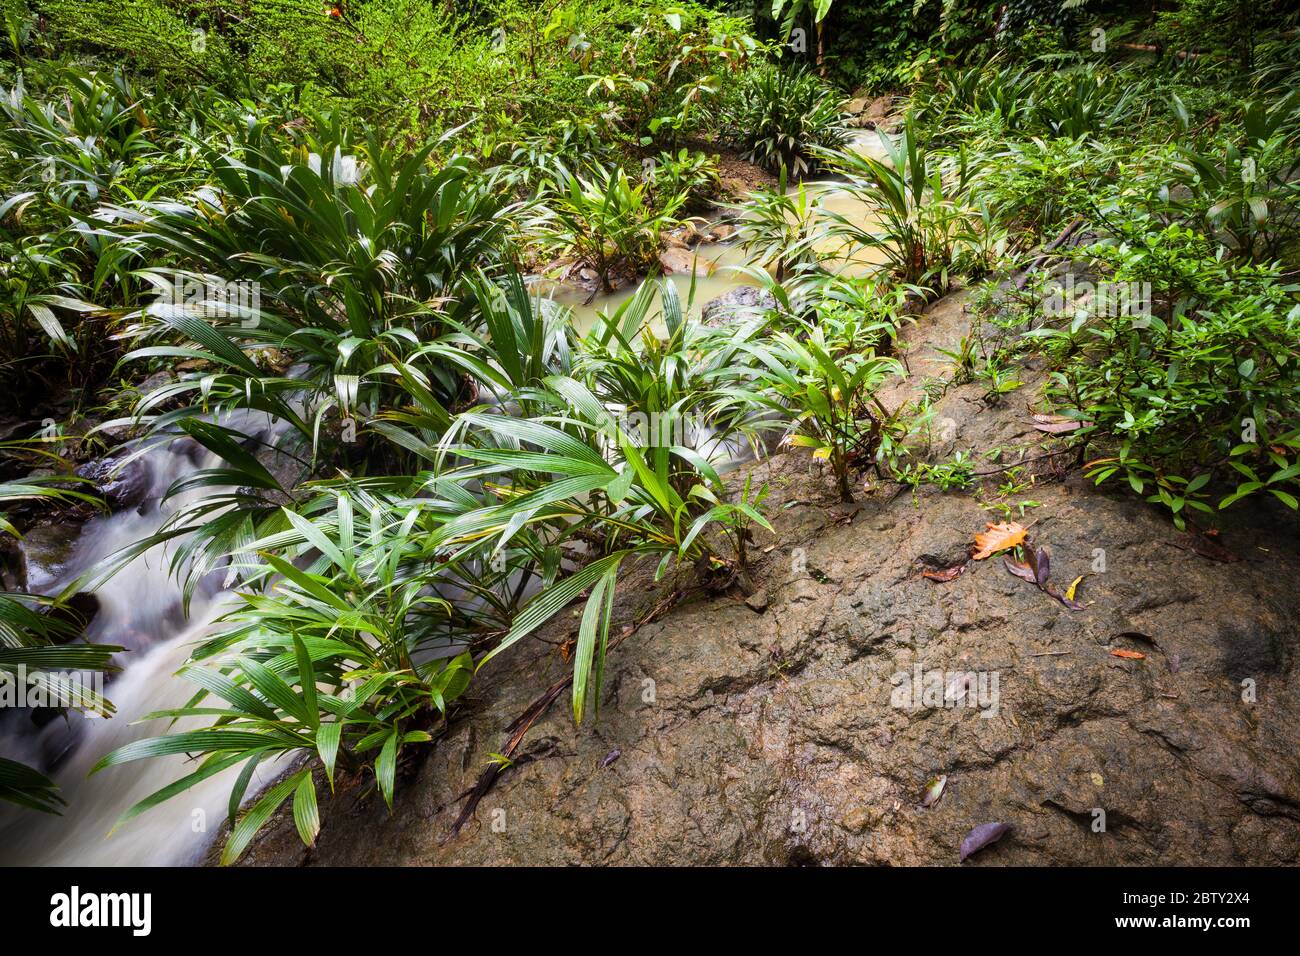 River stream surrounded by tropical vegetation in the lush rainforest at Burbayar private nature reserve, Panama province, Republic of Panama. Stock Photo